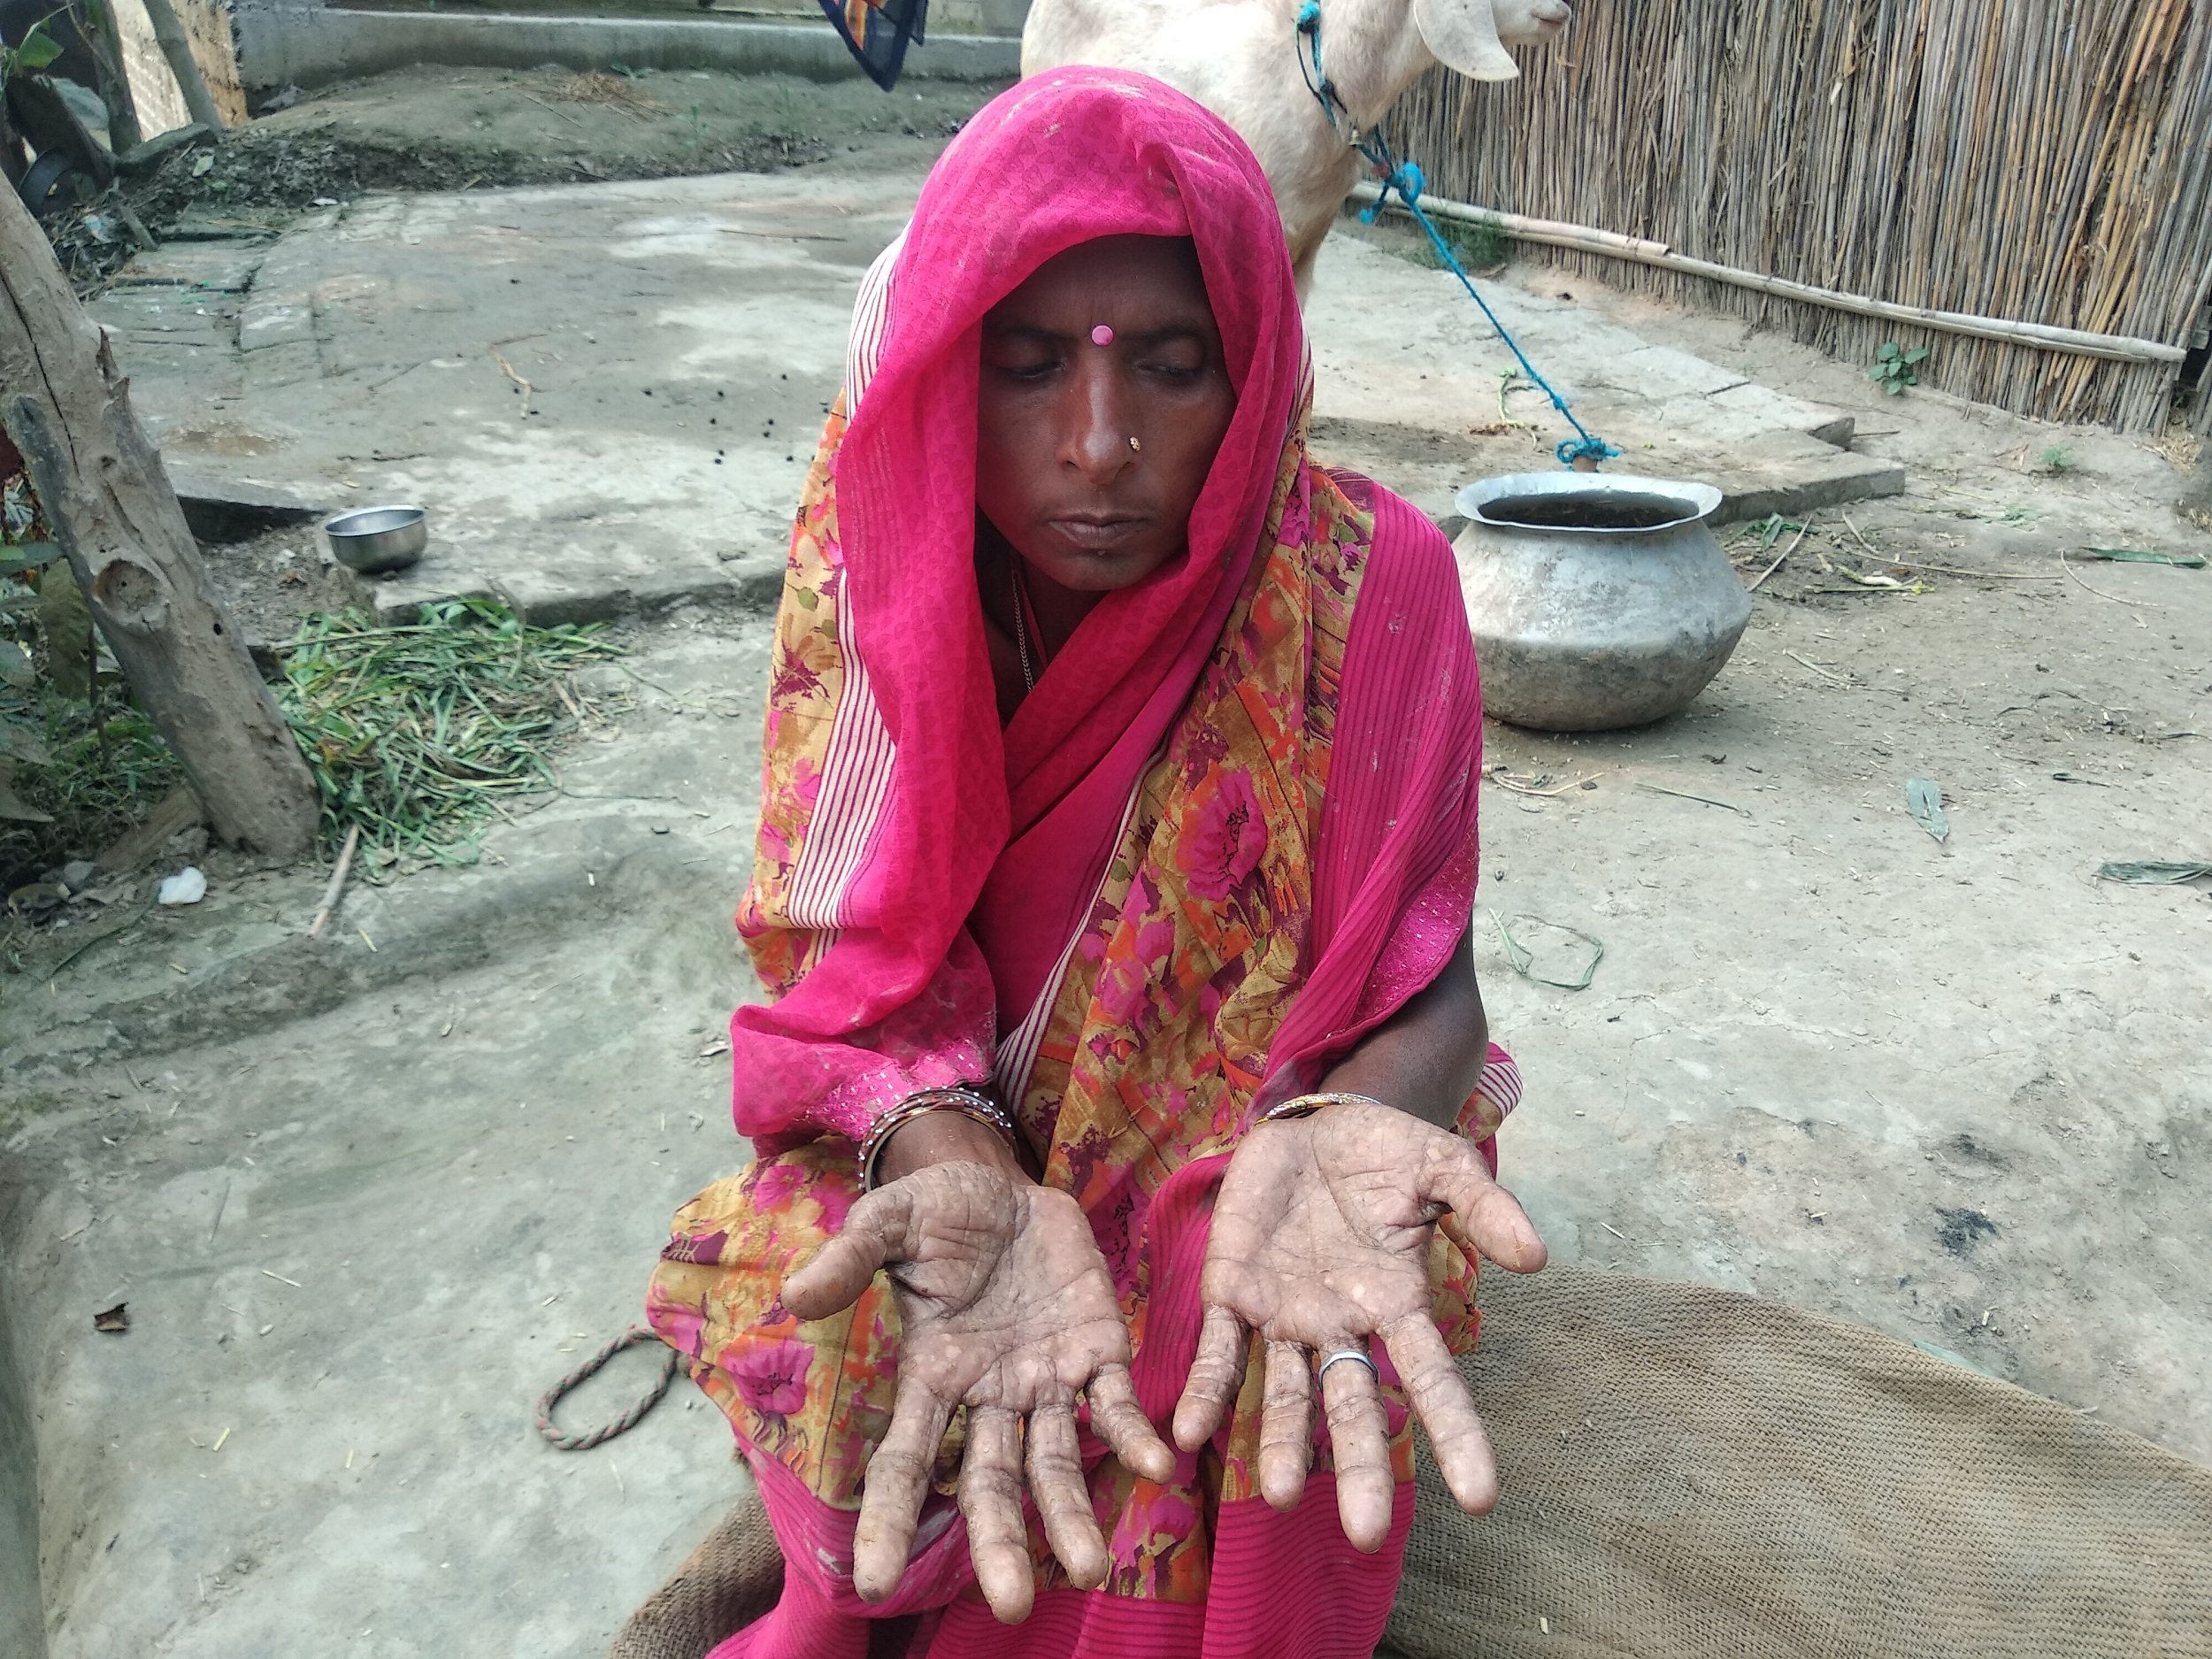 <p>Indu Devi, 35, of Chapar village of Moinuddinagar block in Samastipur district of Bihar. She is suffering from lesions on her hands and feet but she never bothered to find out how they appeared. She said these don’t itch, so she didn’t think they need to be treated [image by: Umesh Kumar Ray]</p>